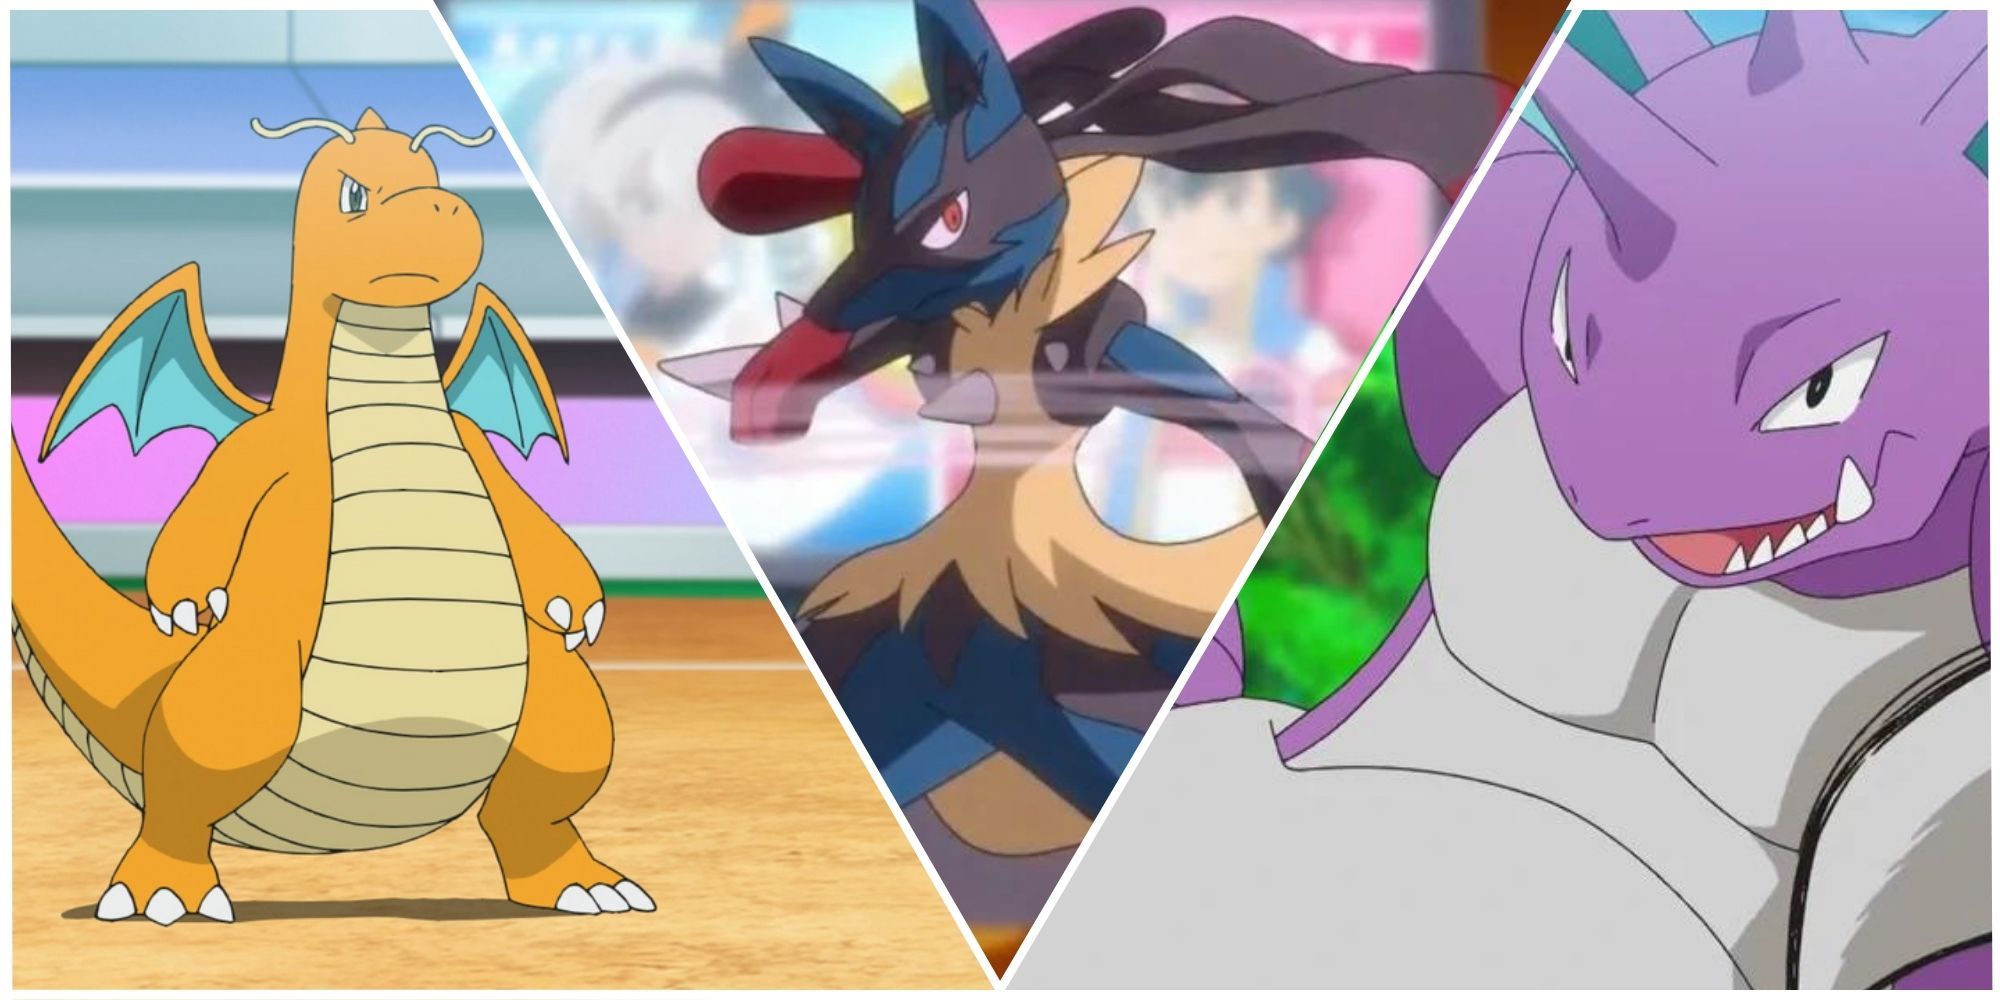 Pokemon Split Image, Dragonite on the left, Mega Lucario in the middle, Nidoking on the right